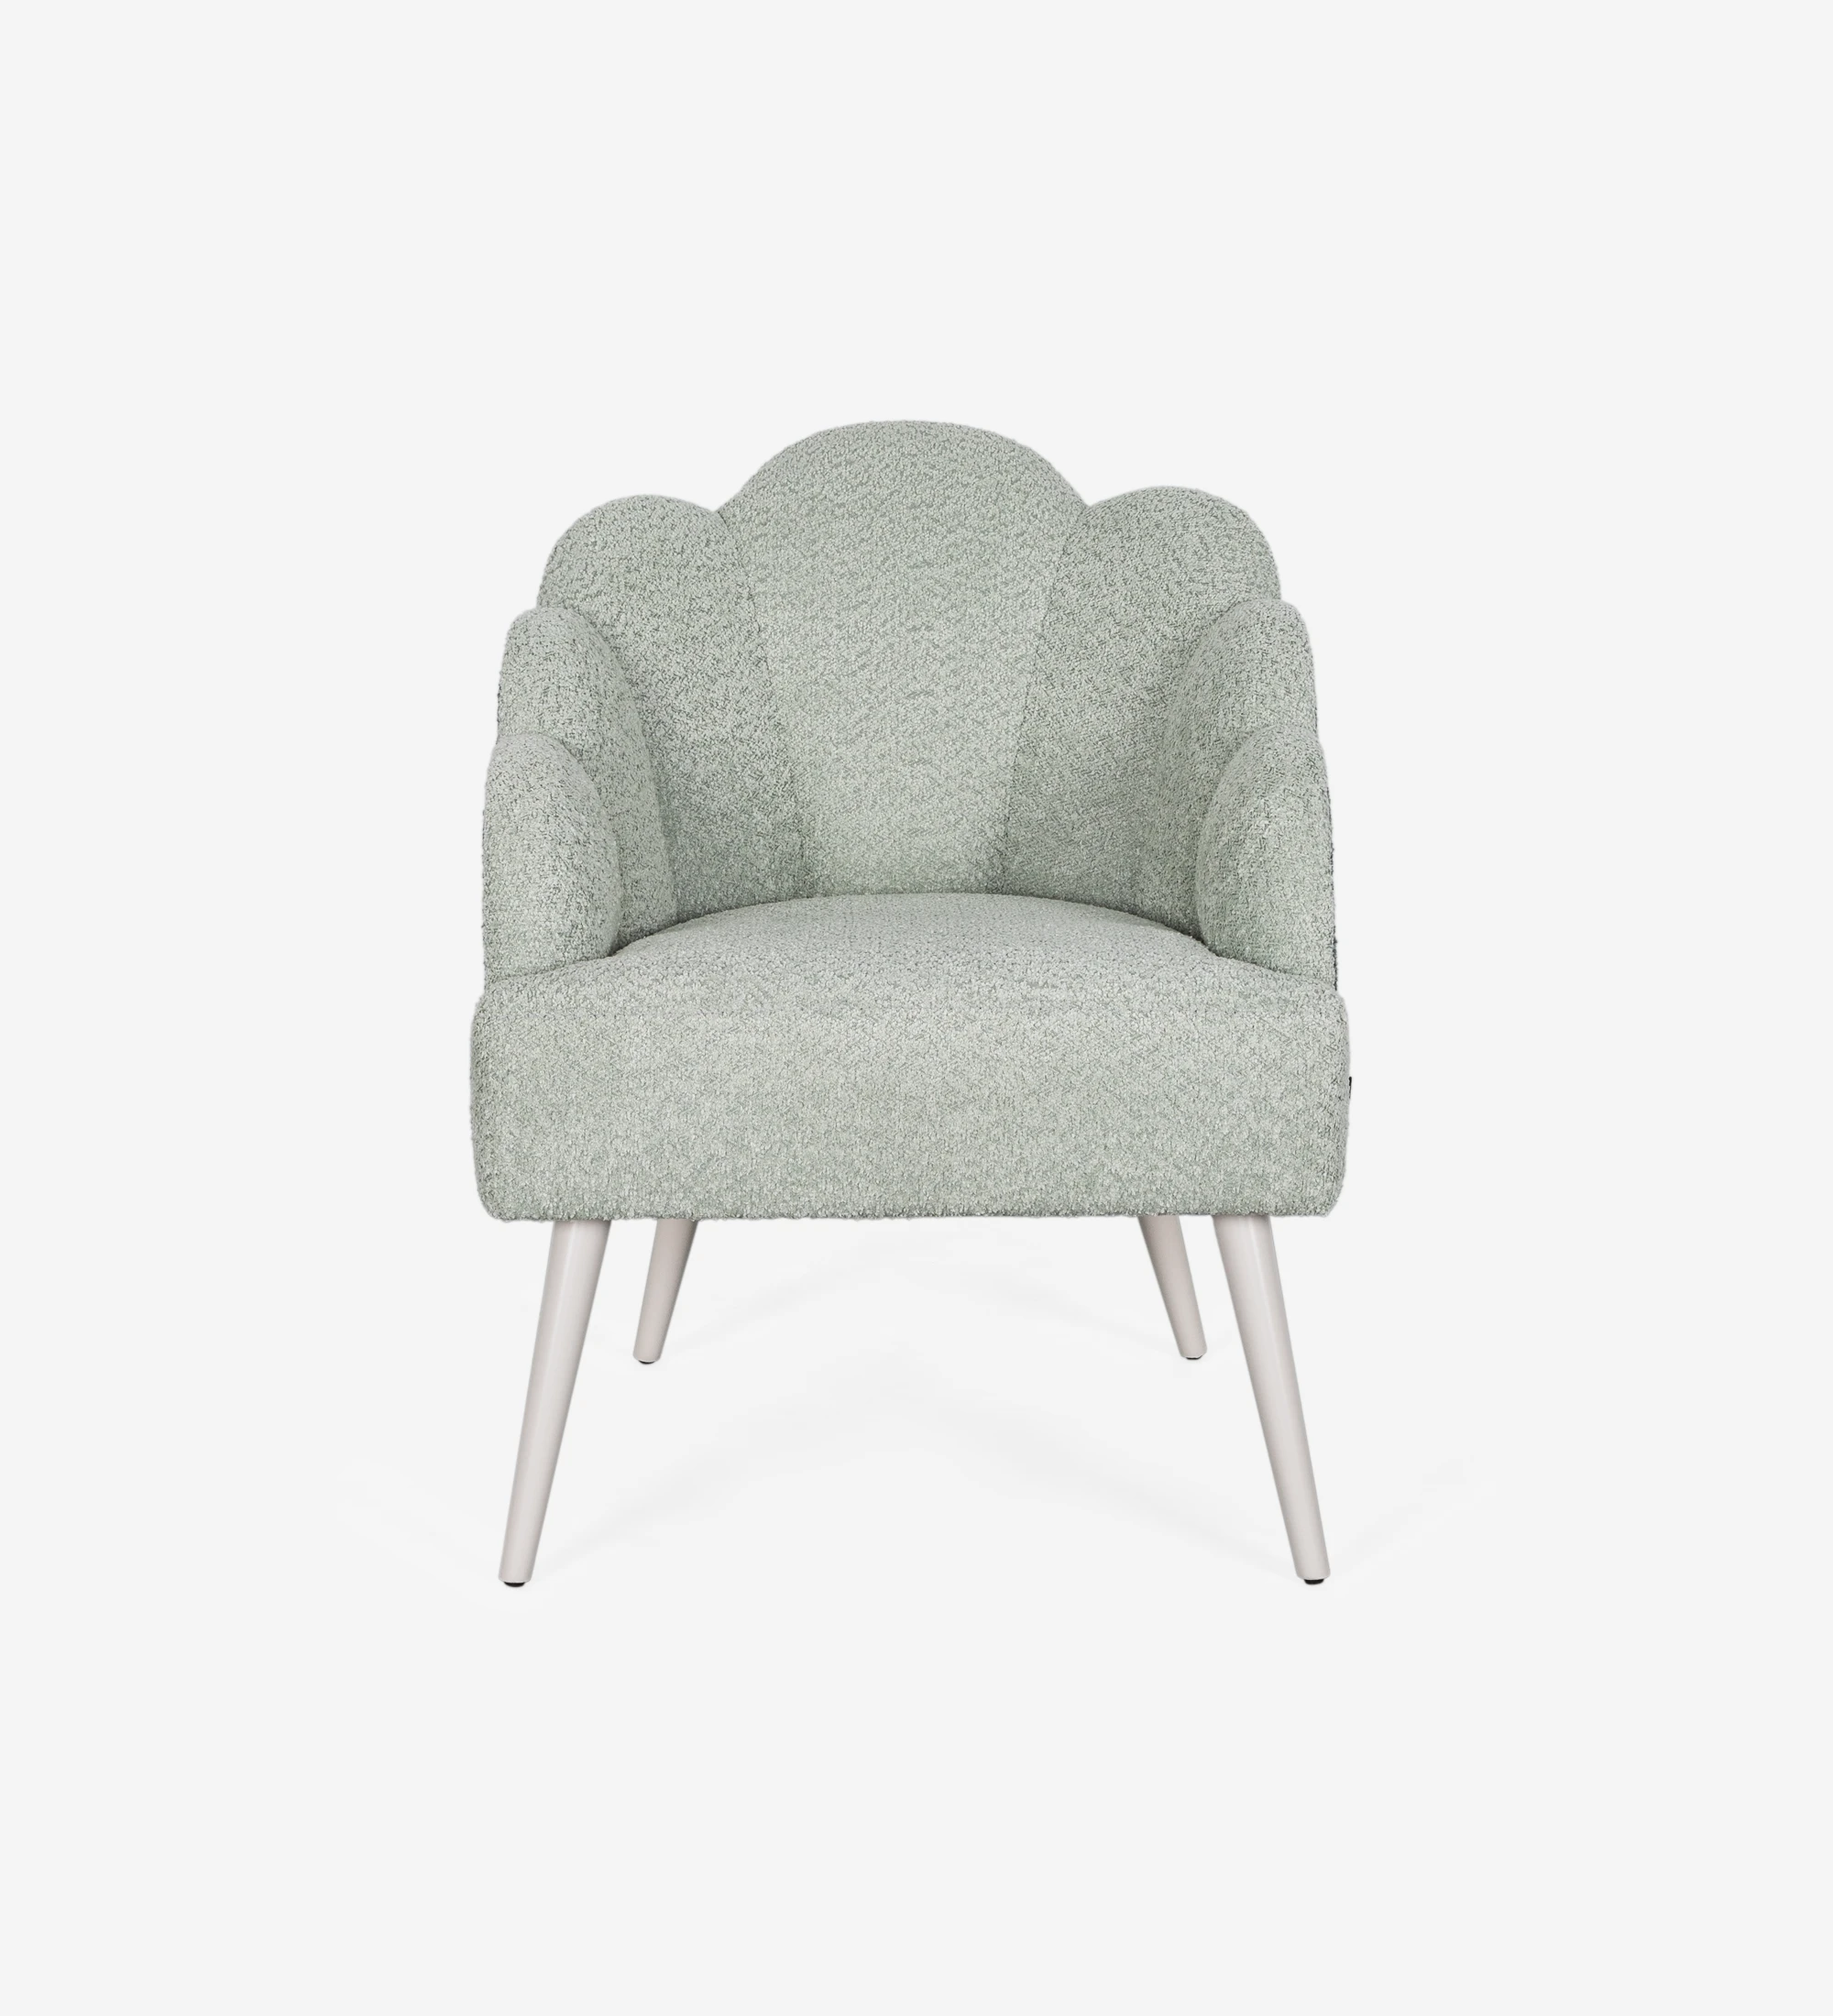 Lisboa armchair upholstered in water green fabric, pearl lacquered feet.